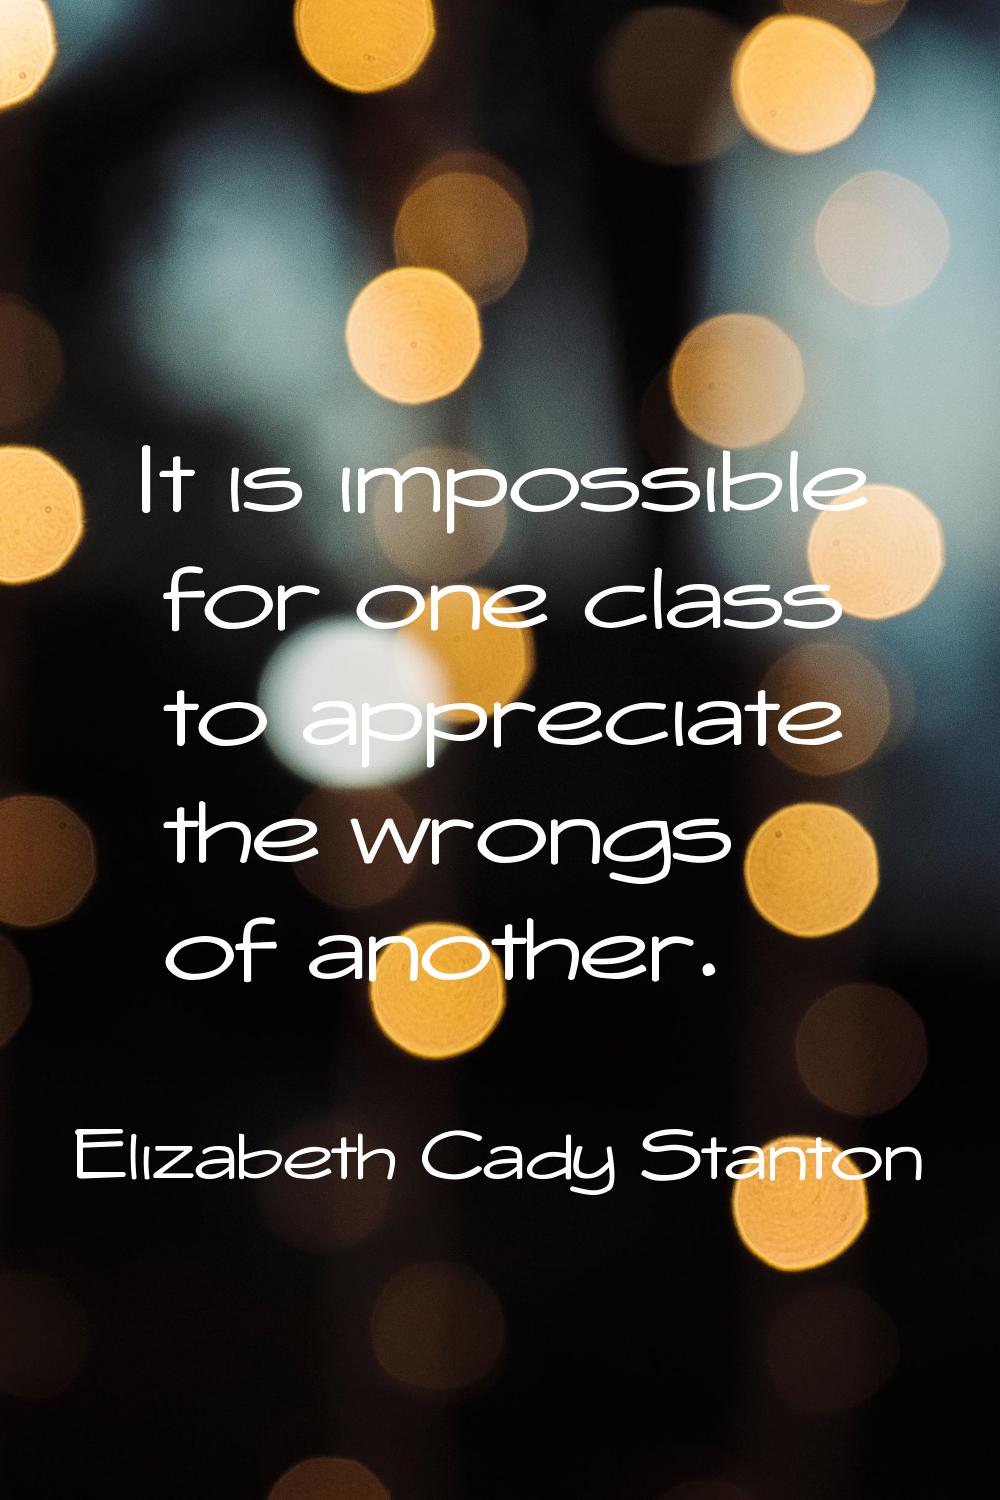 It is impossible for one class to appreciate the wrongs of another.